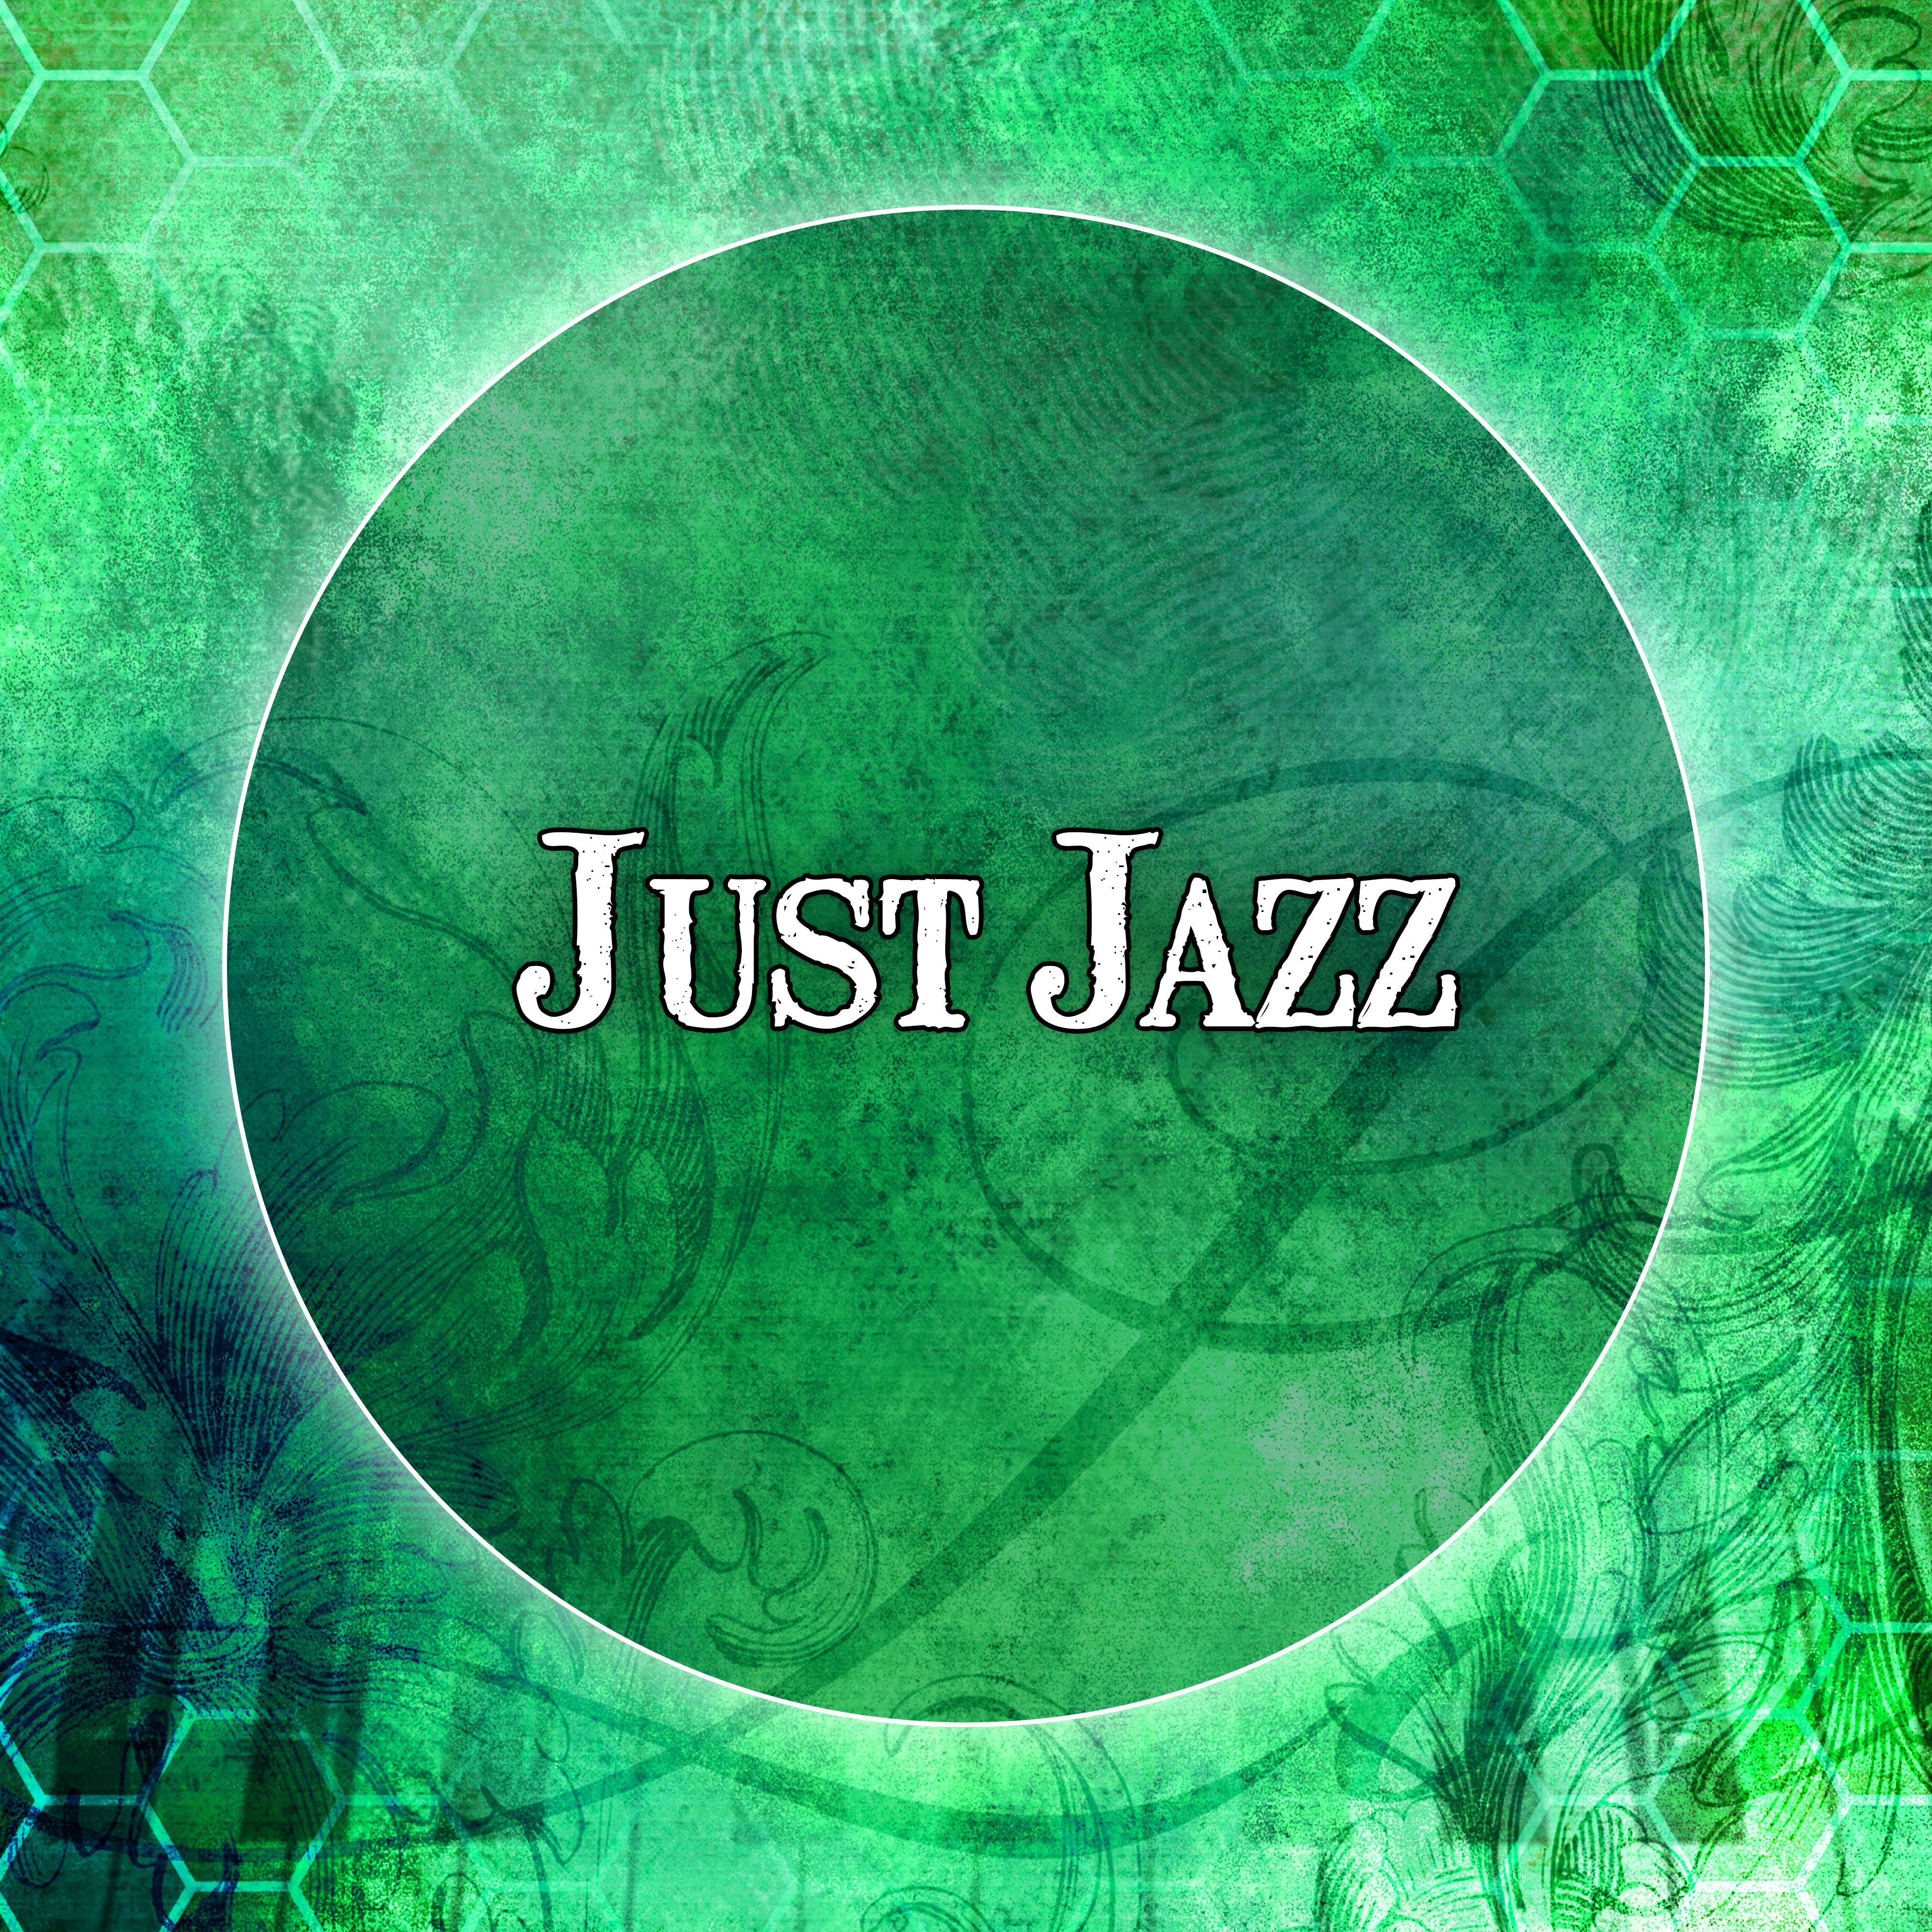 Just Jazz  Gentle Jazz Music for Relaxing Time, Soft Jazz Sounds, Ambient Rest, Most Streaming Jazz Sounds